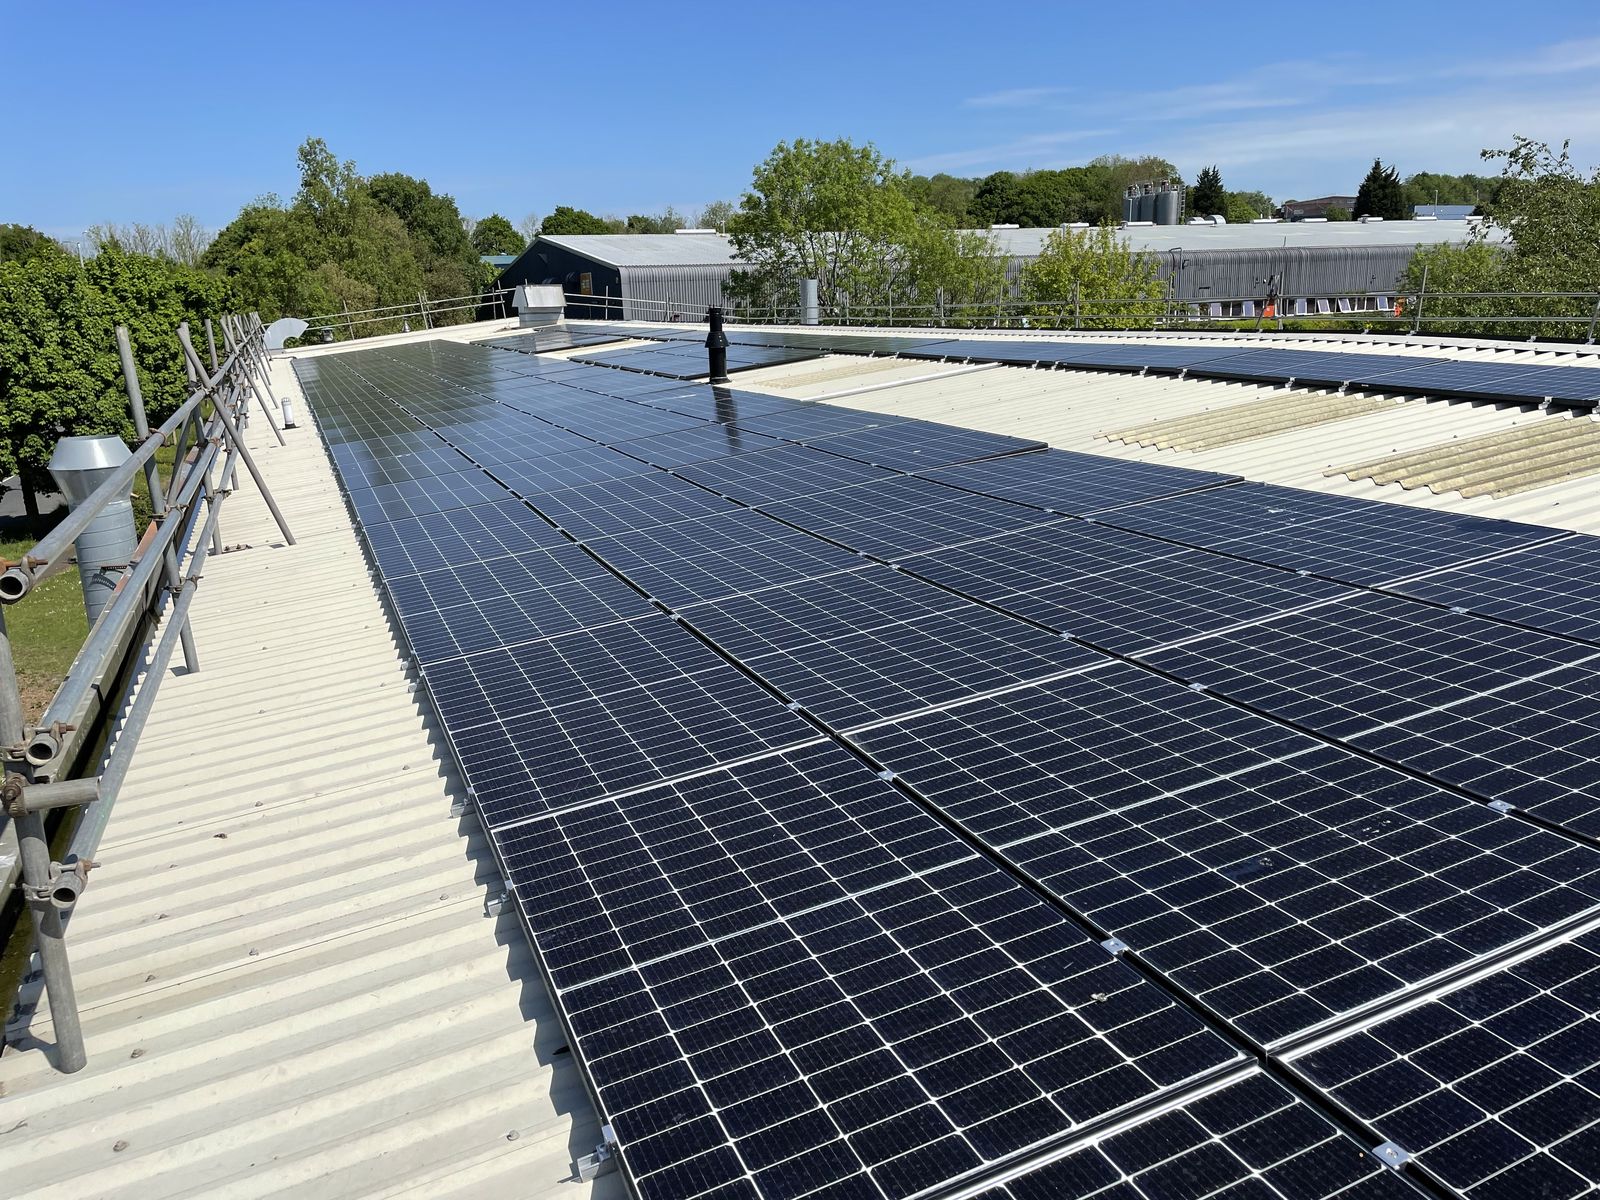 Solar panels installation at Focus SB is completed